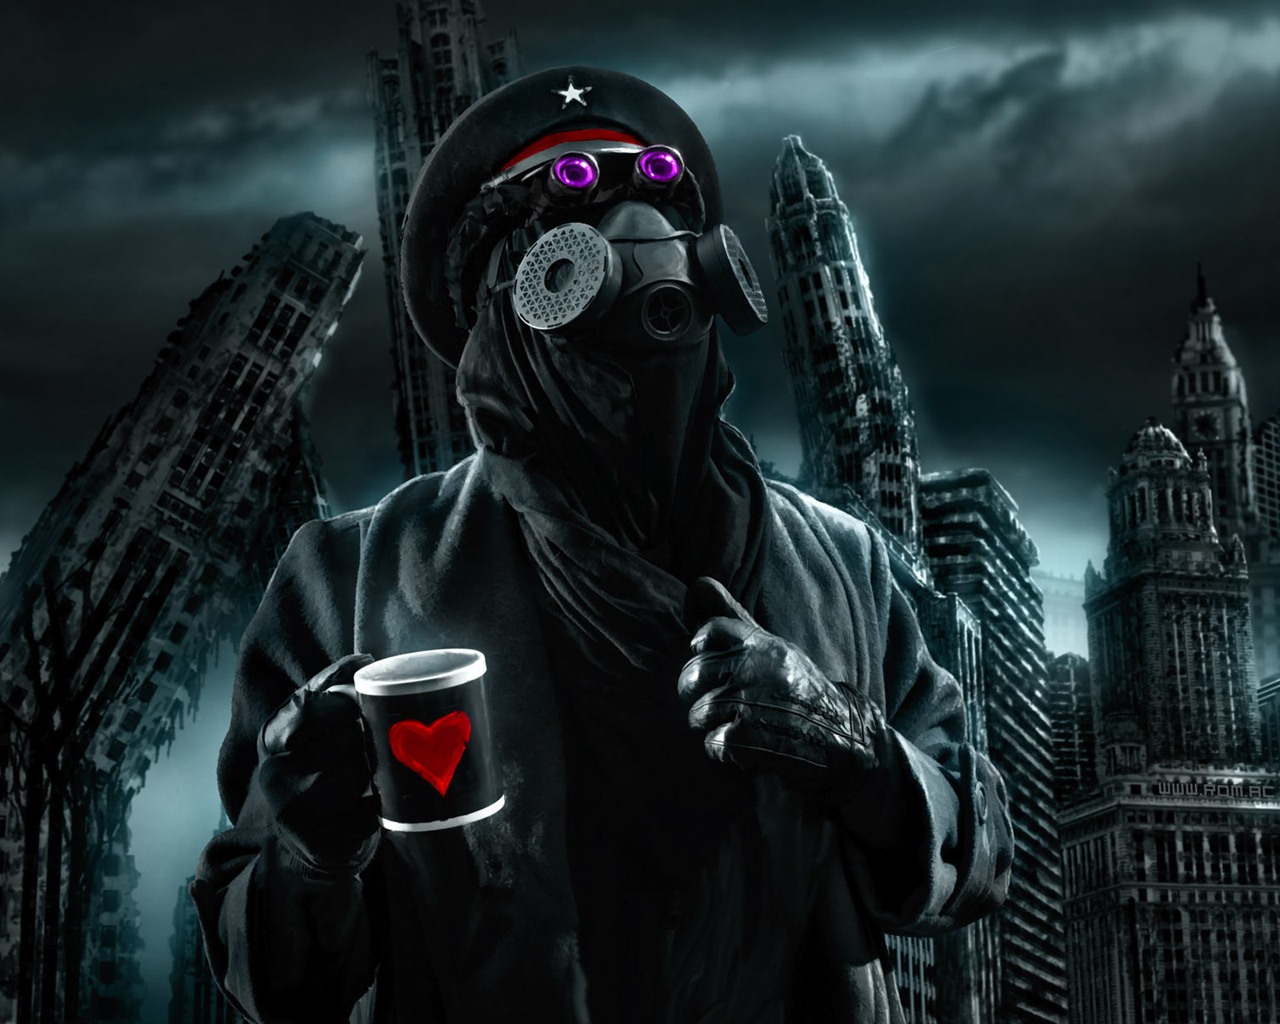 Romantically Apocalyptic creative painting wallpapers (2) #15 - 1280x1024